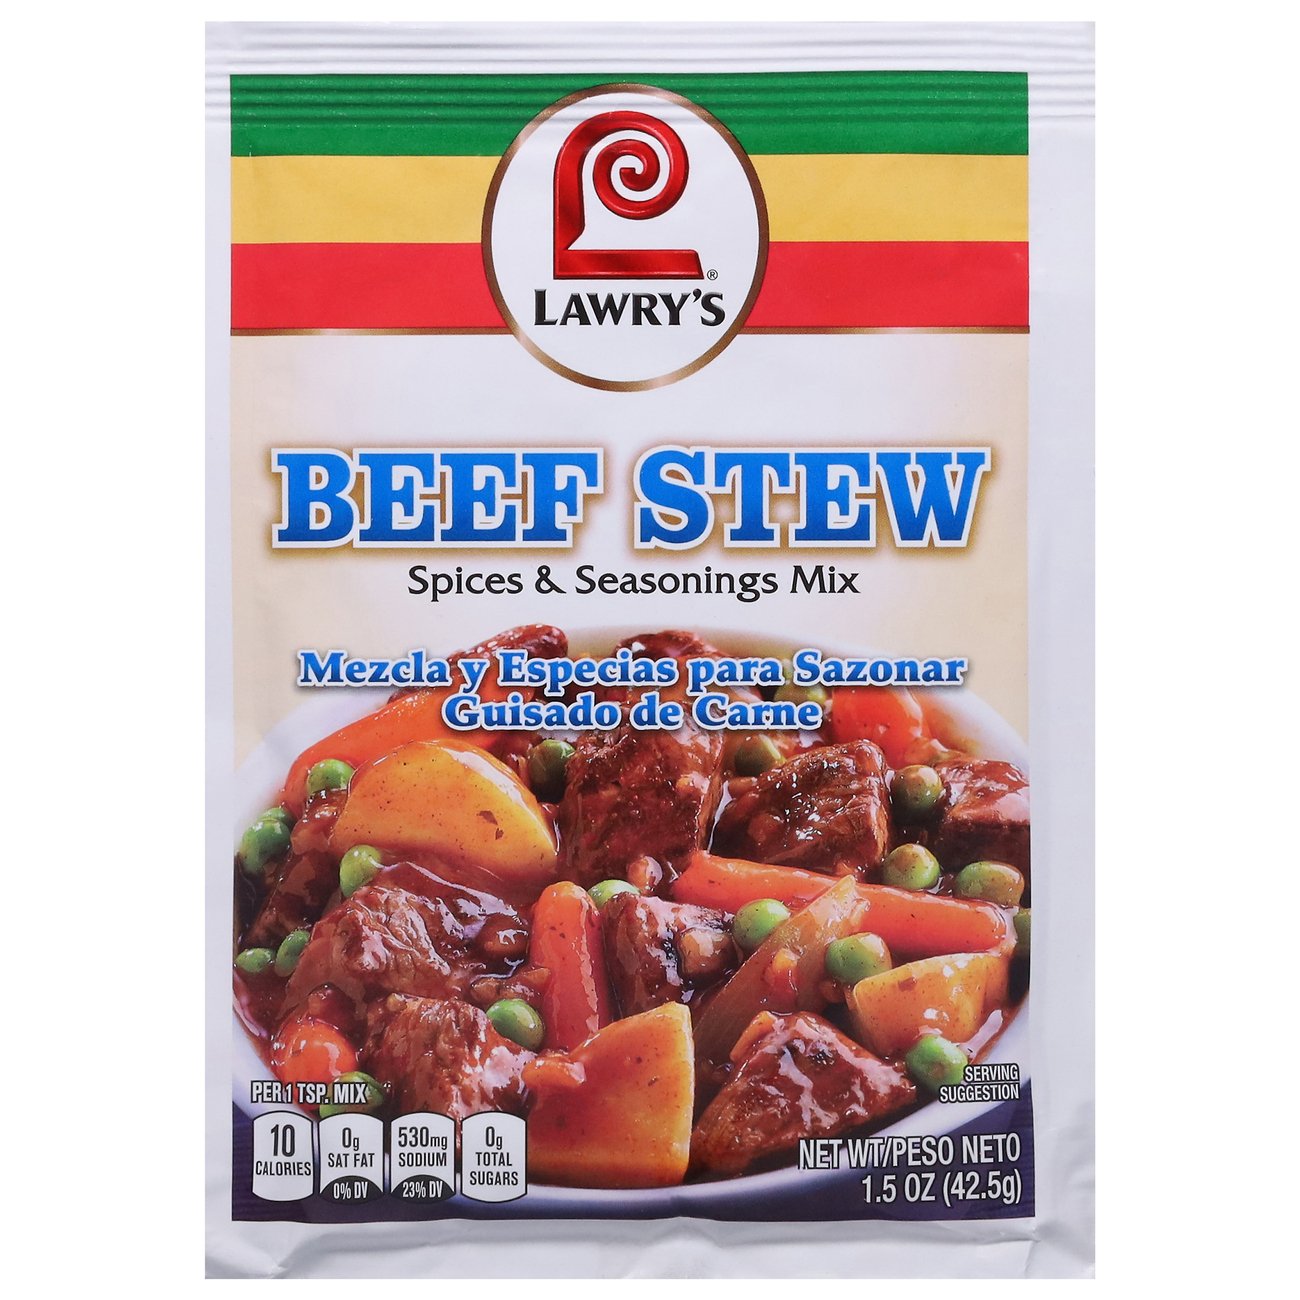 Lawry's Beef Stew Spices & Seasonings Mix - Shop Spice Mixes at H-E-B